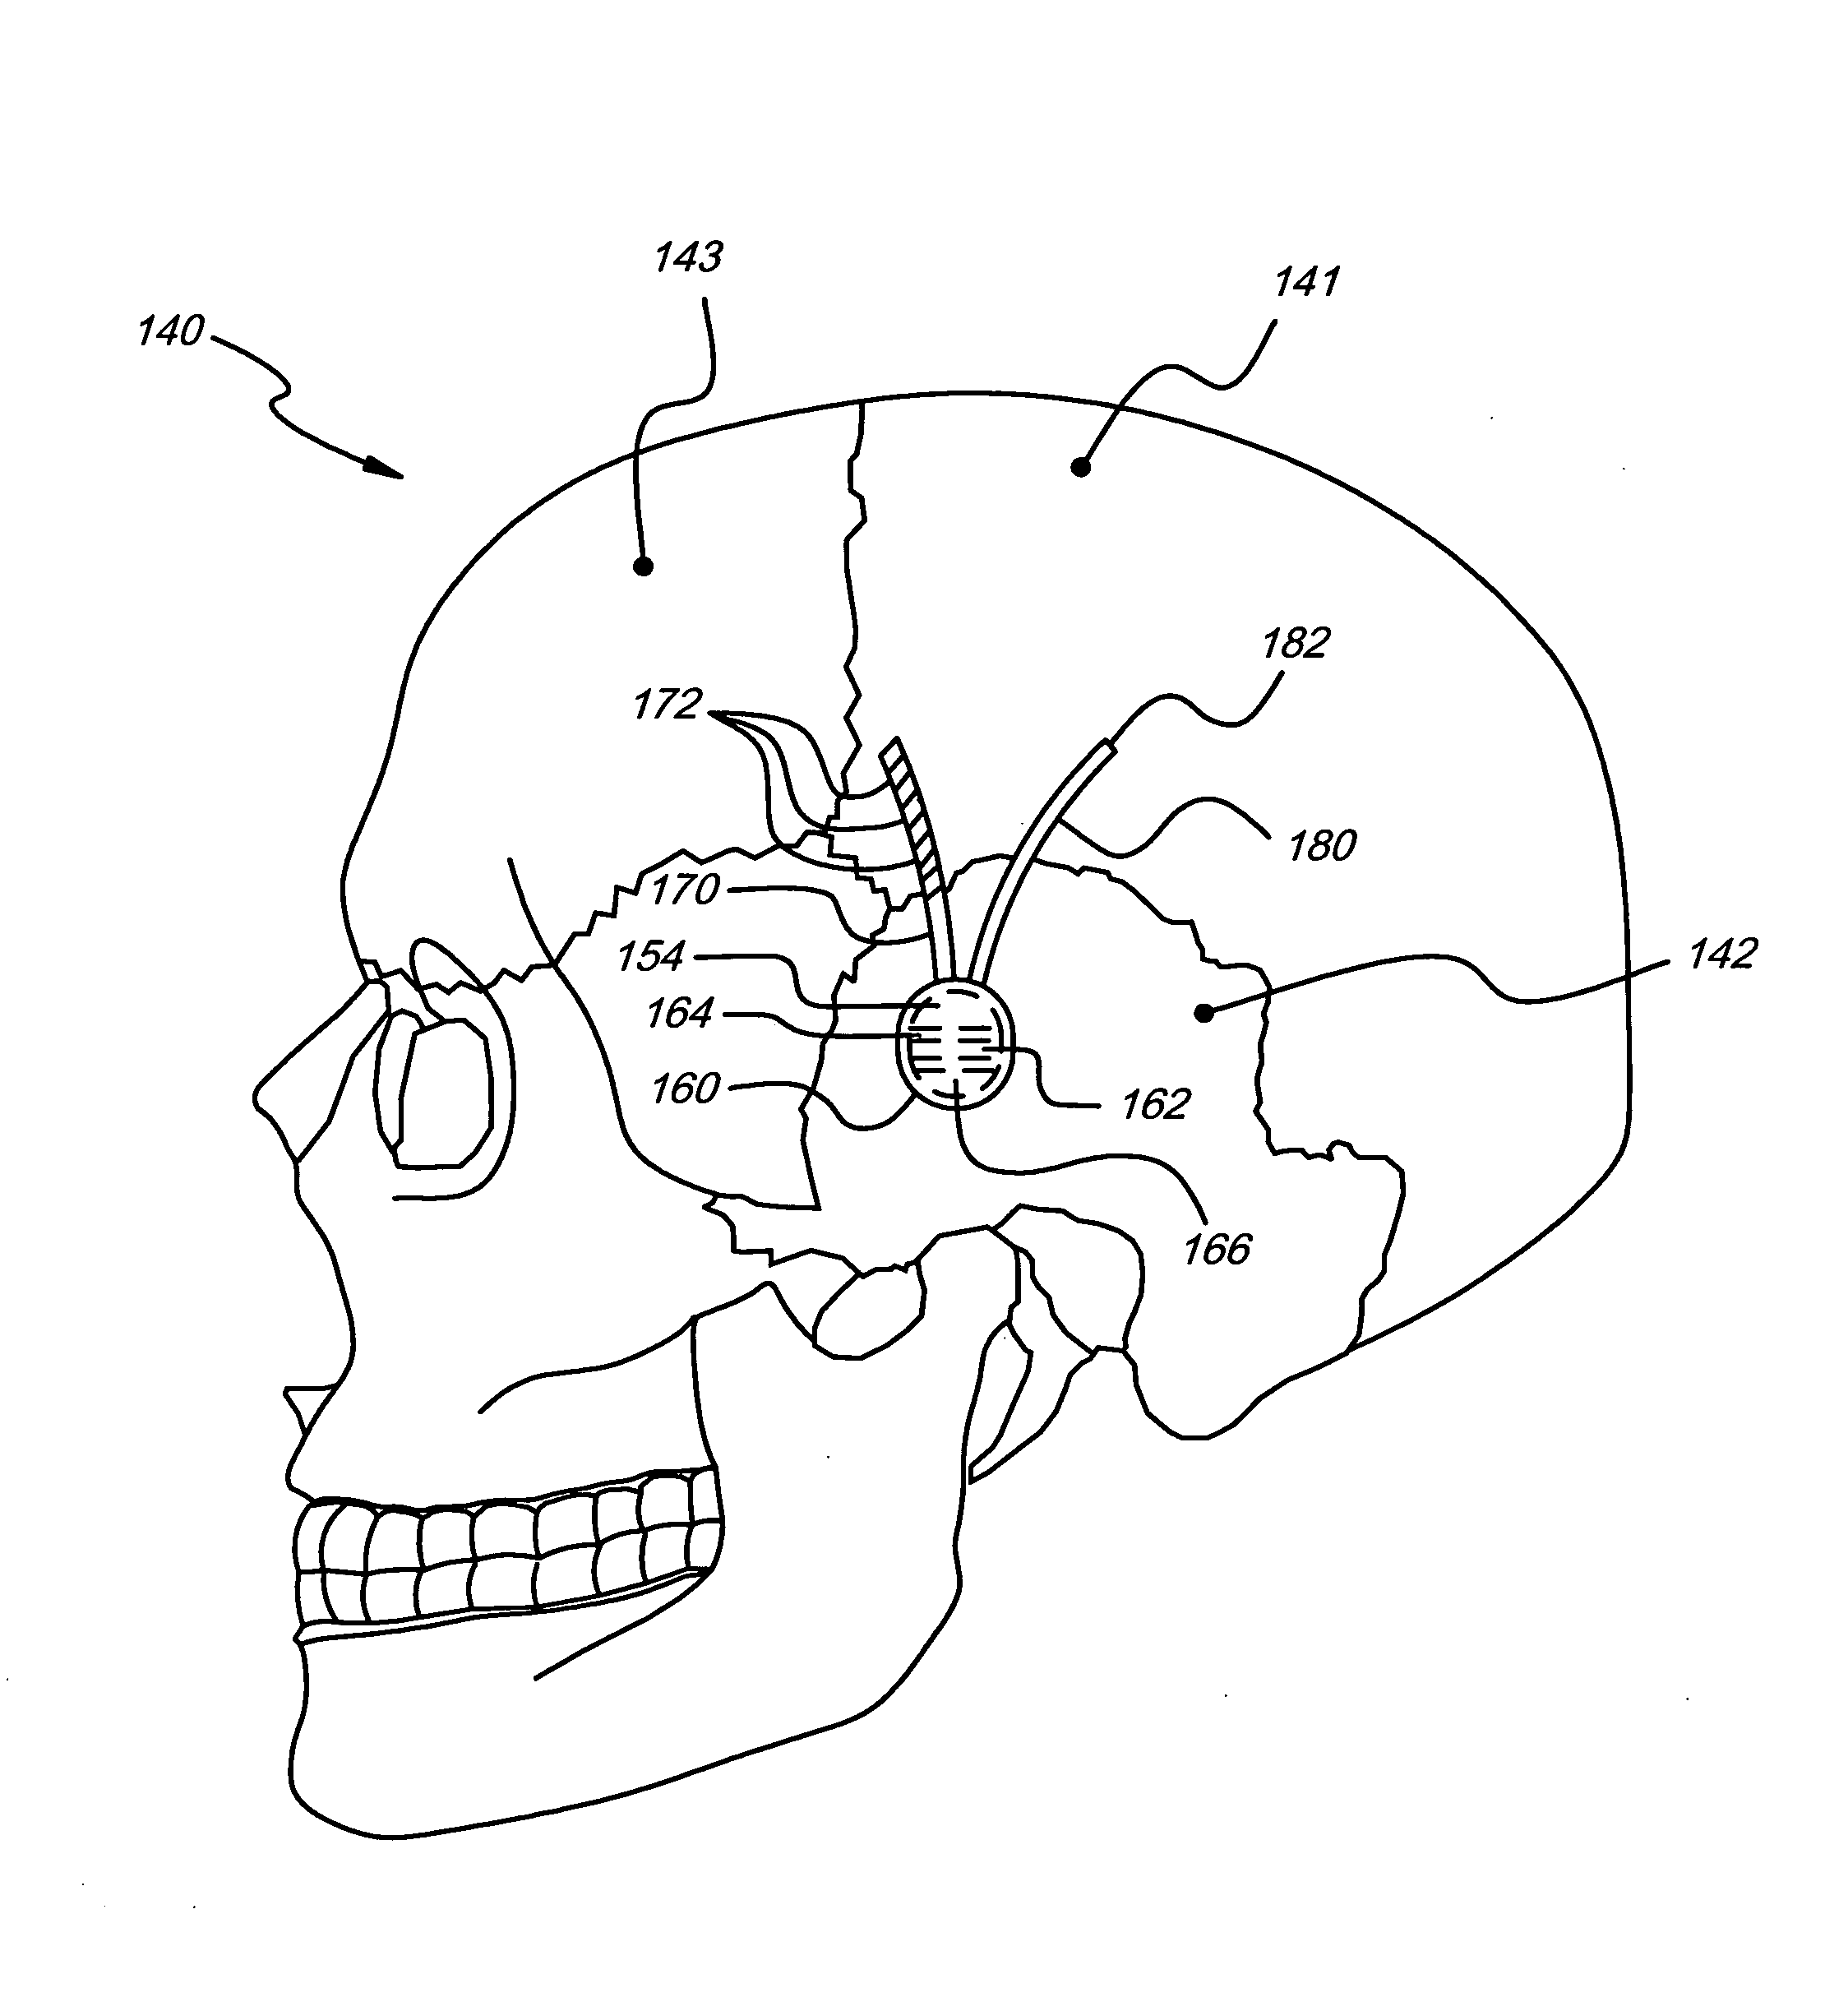 Treatment of aphasia by electrical stimulation and/or drug infusion